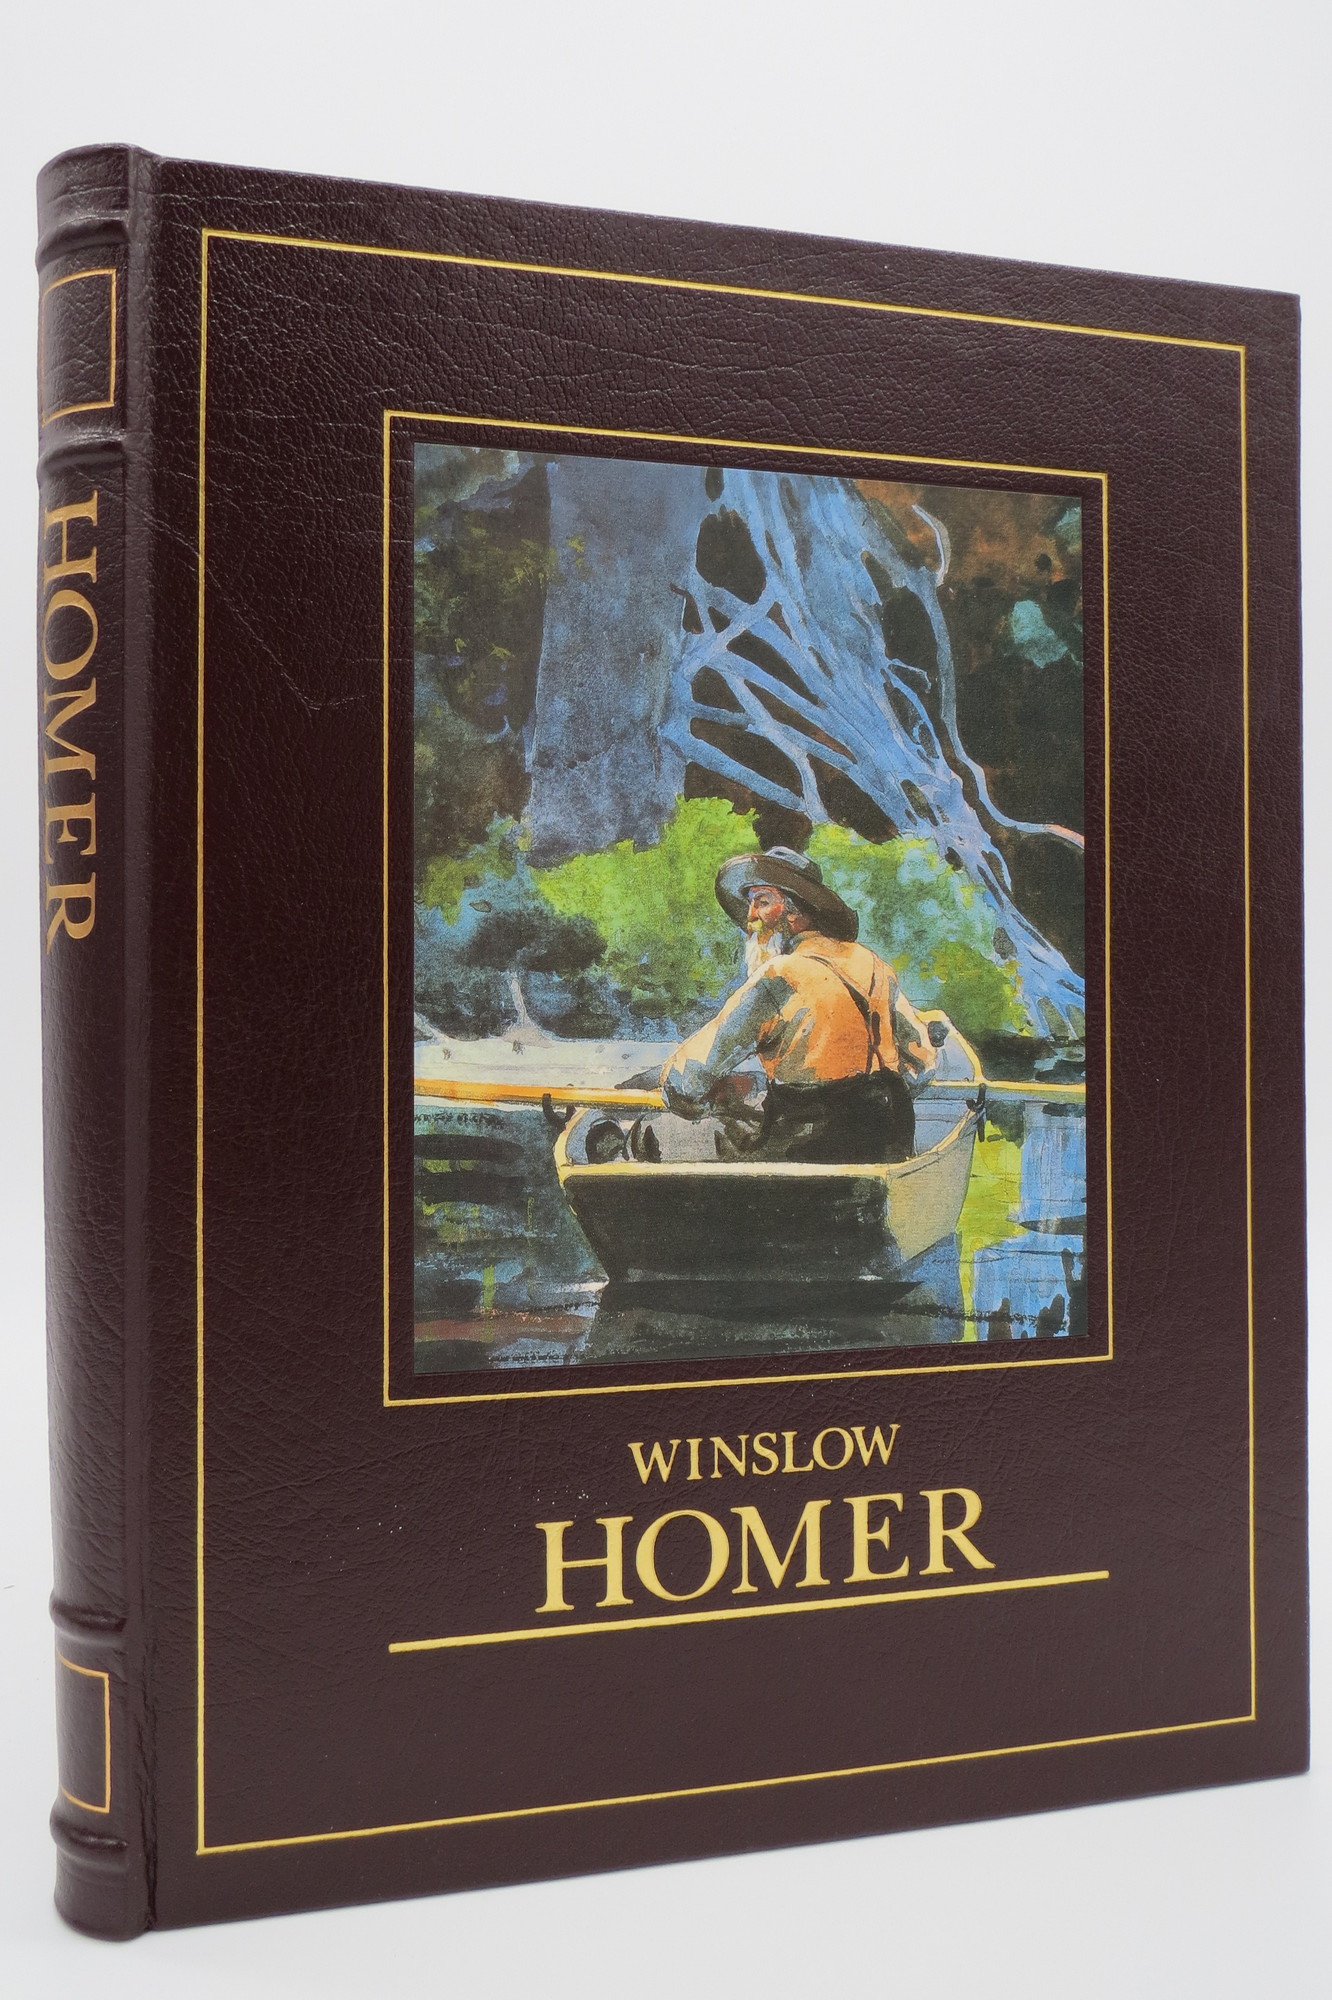 Image for WINSLOW HOMER (LIBRARY OF AMERICAN ART)  (leather bound)   (Provenance: Israeli Artist Avraham Loewenthal)